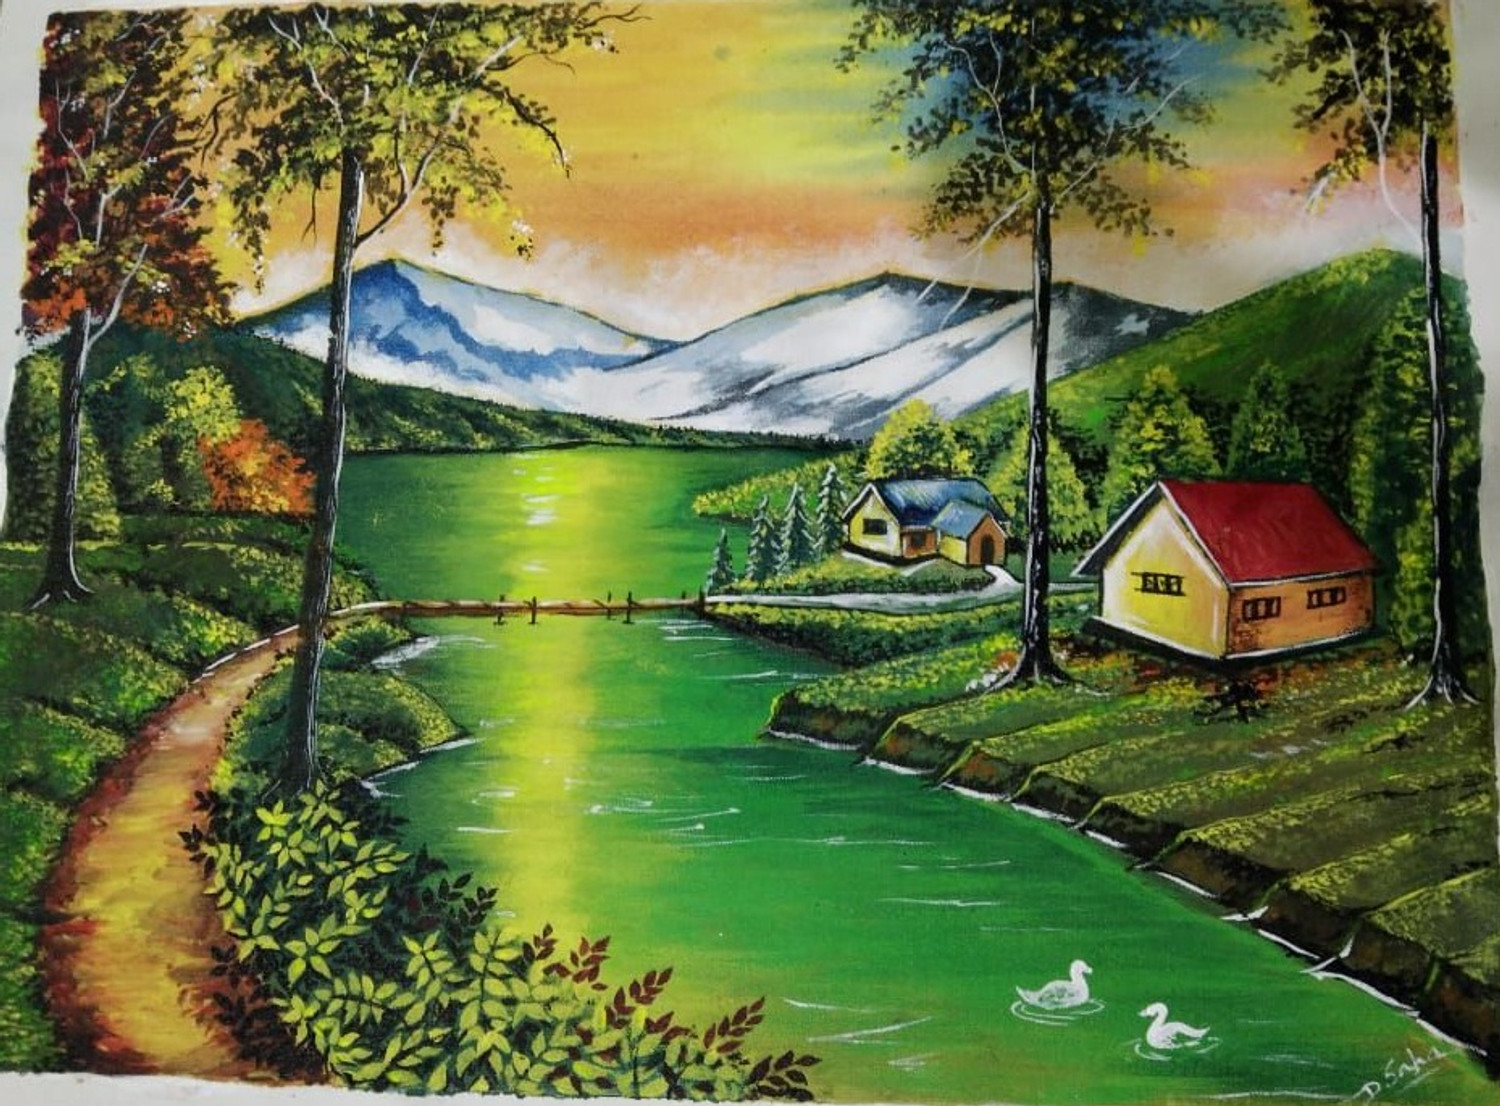 Scenery of Huts with Love of Spring Stock Illustration - Illustration of  nature, mountains: 121142998